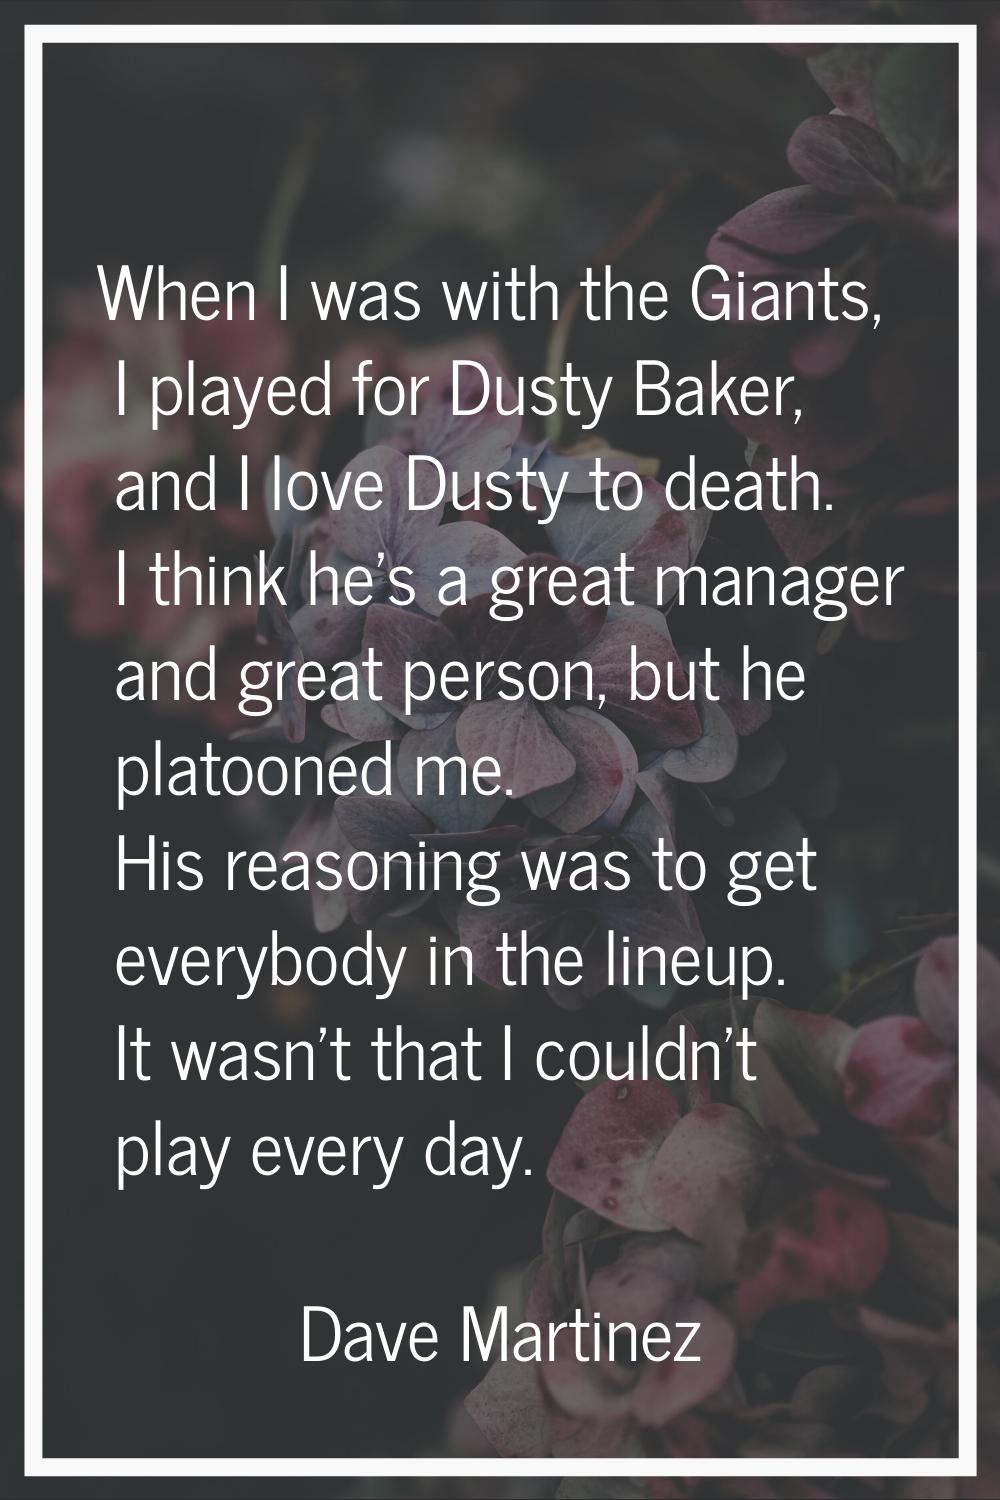 When I was with the Giants, I played for Dusty Baker, and I love Dusty to death. I think he's a gre